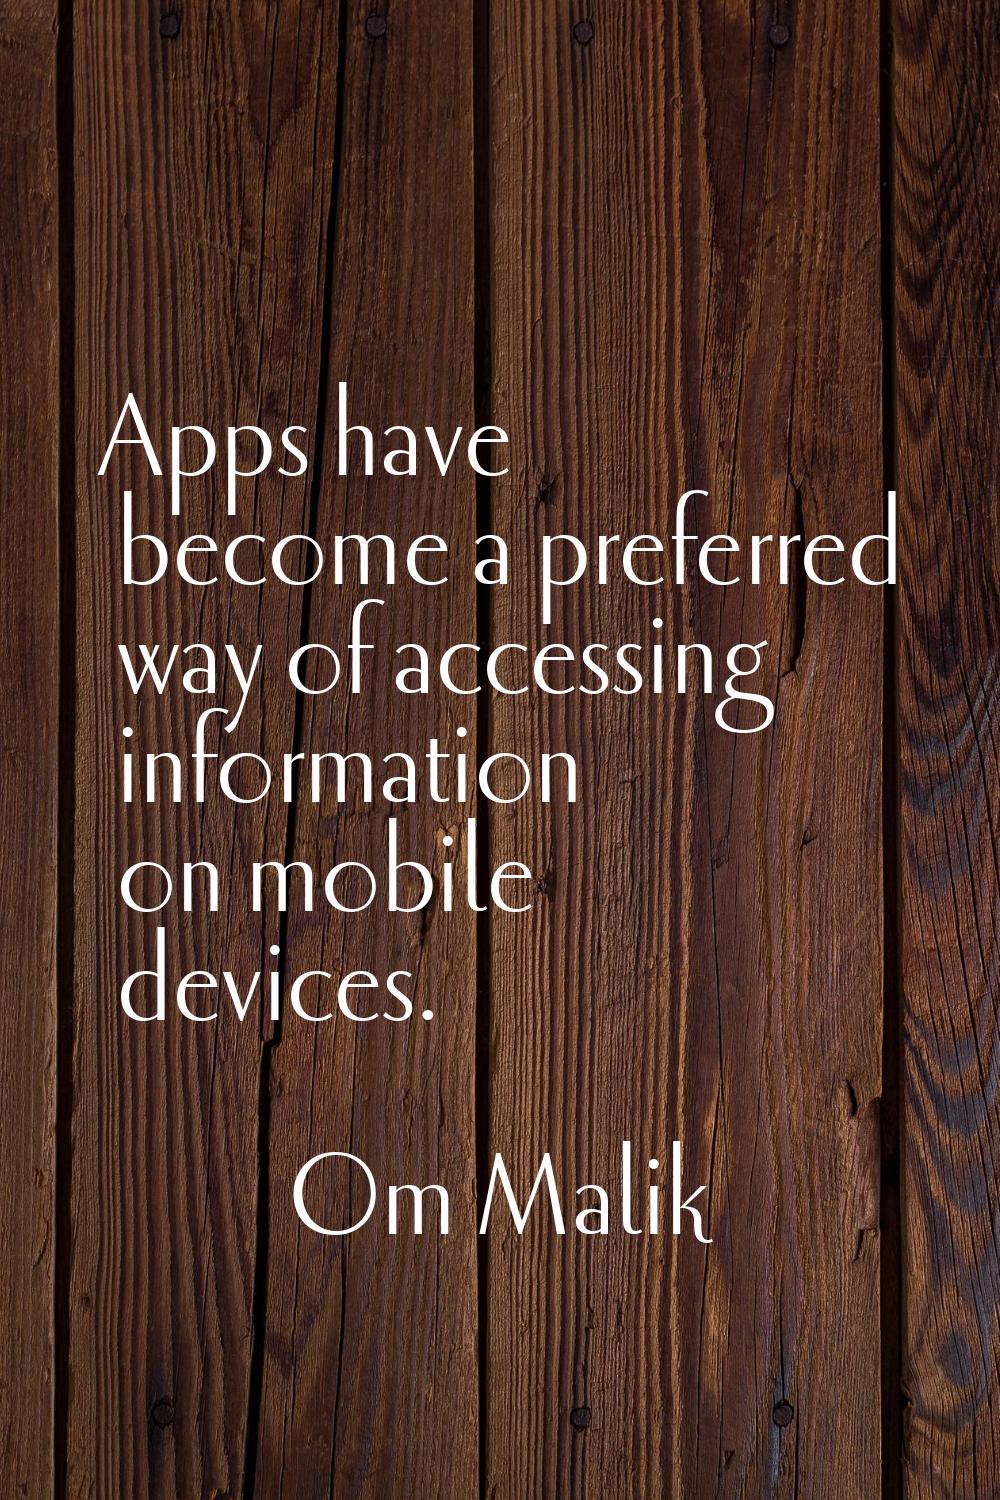 Apps have become a preferred way of accessing information on mobile devices.